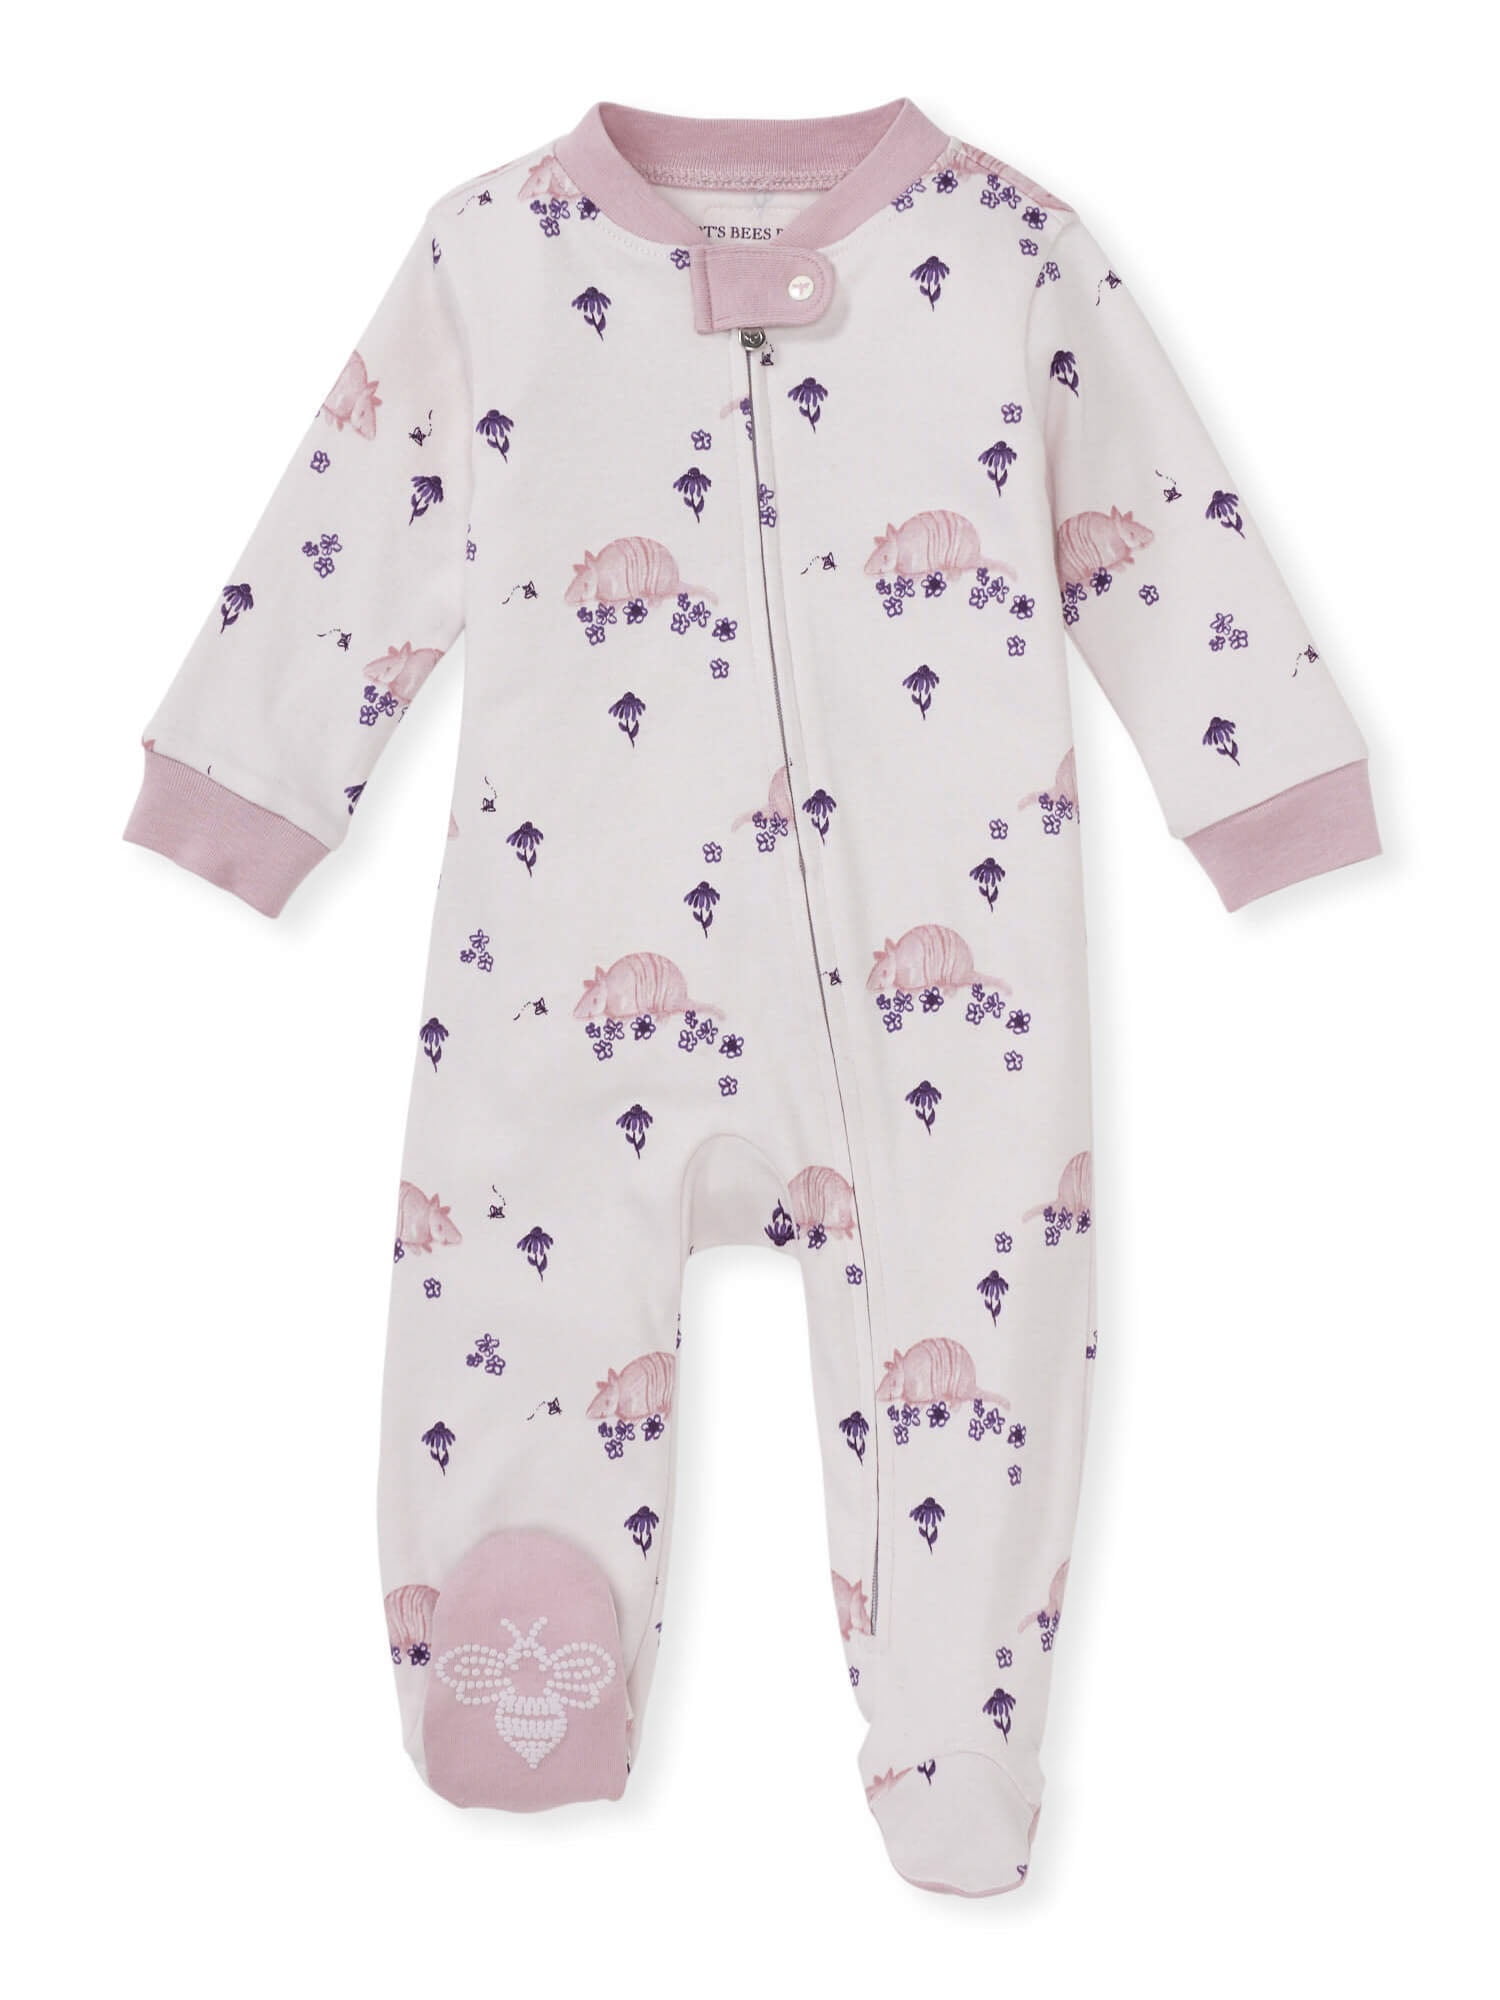 Yuwao Baby Girls Rompers 100% Cotton Pajamas Long Sleeve Onesies Cute Jumpsuit Soft Bodysuits Pink Sleepsuit Outfits Newborn 0-18 Months 